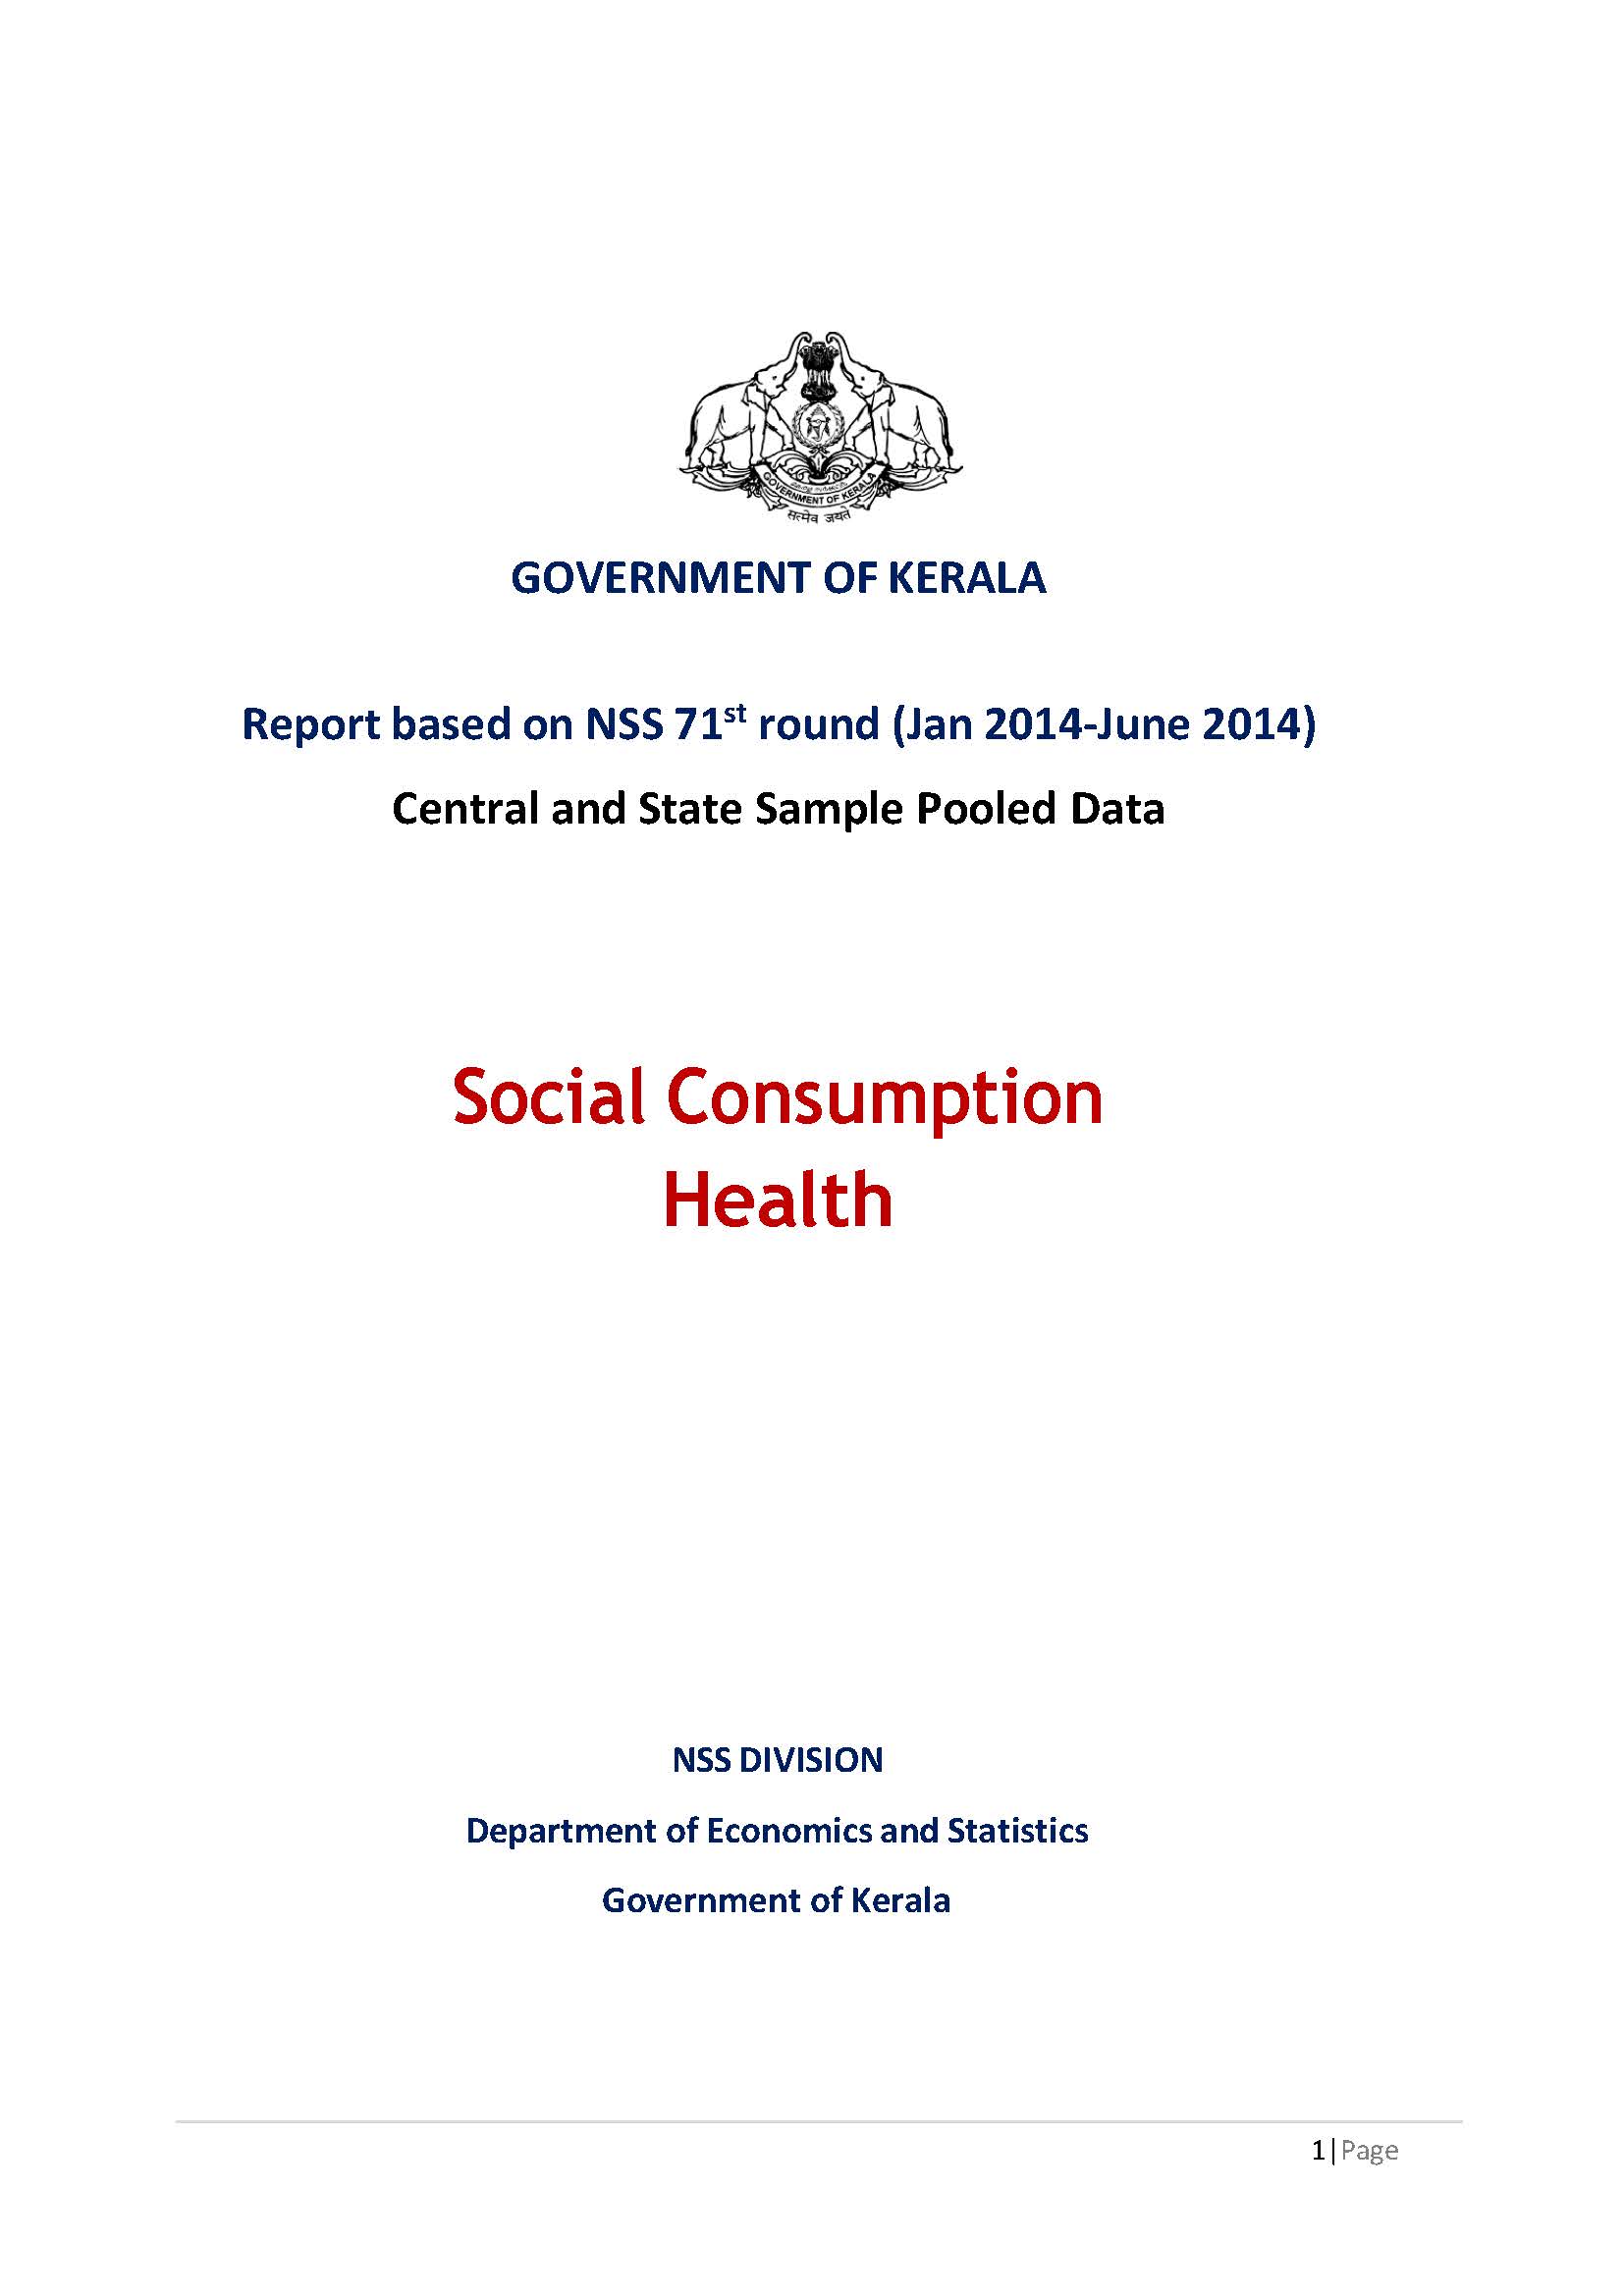 NSS 71st round - Central and State Sample Pooled Data - Social Consumption Health